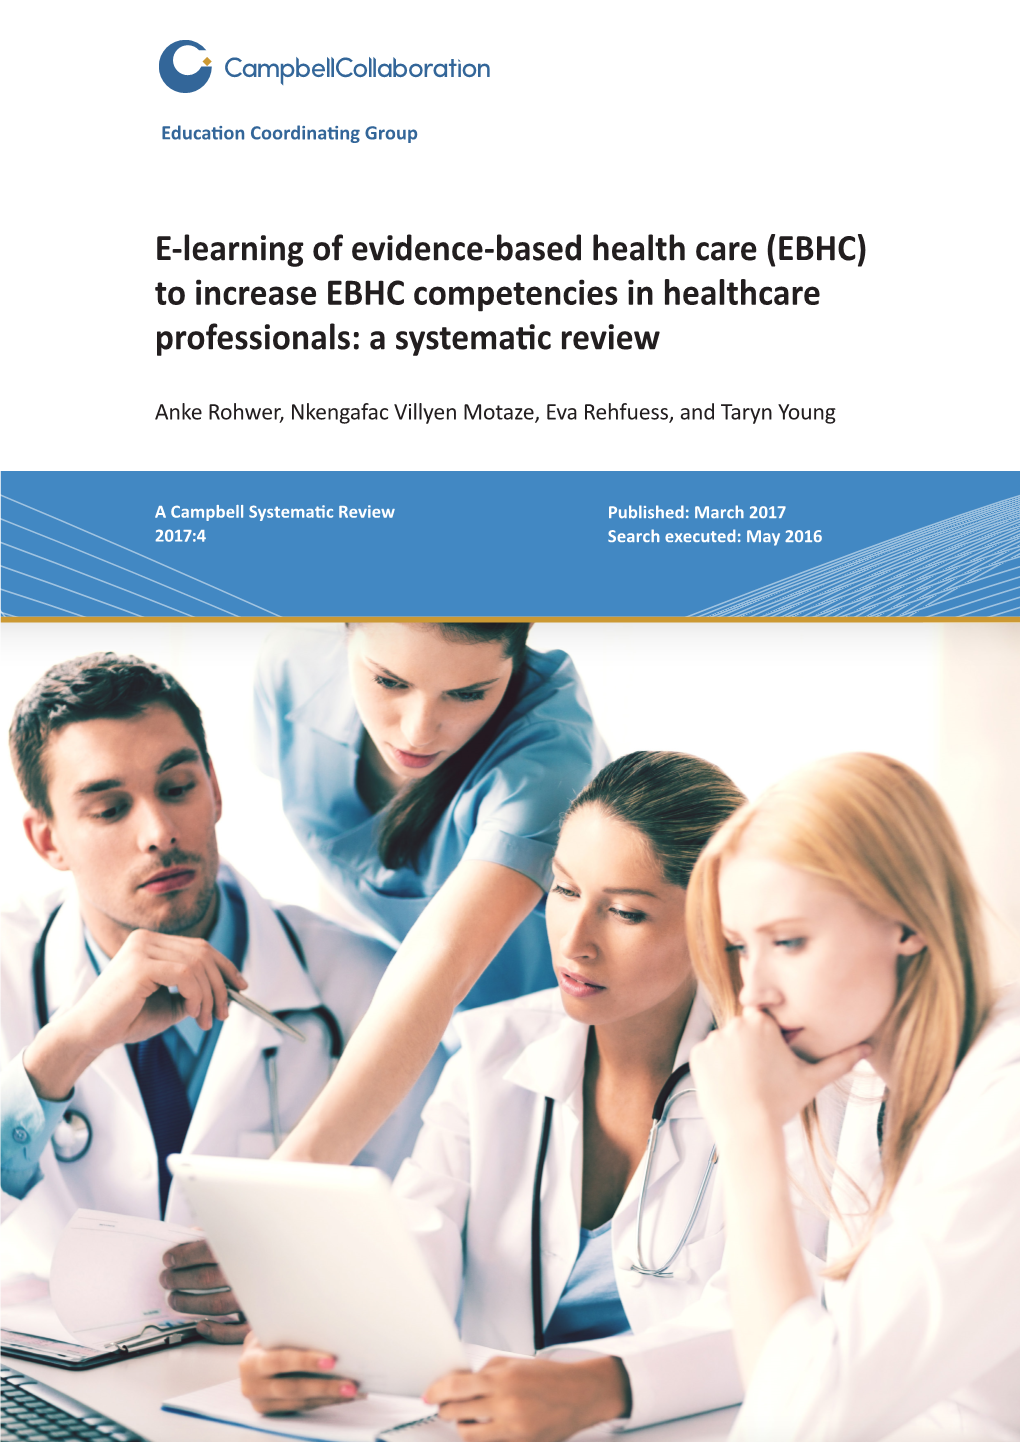 E-Learning of Evidence-Based Health Care (EBHC) to Increase EBHC Competencies in Healthcare Professionals: a Systematic Review